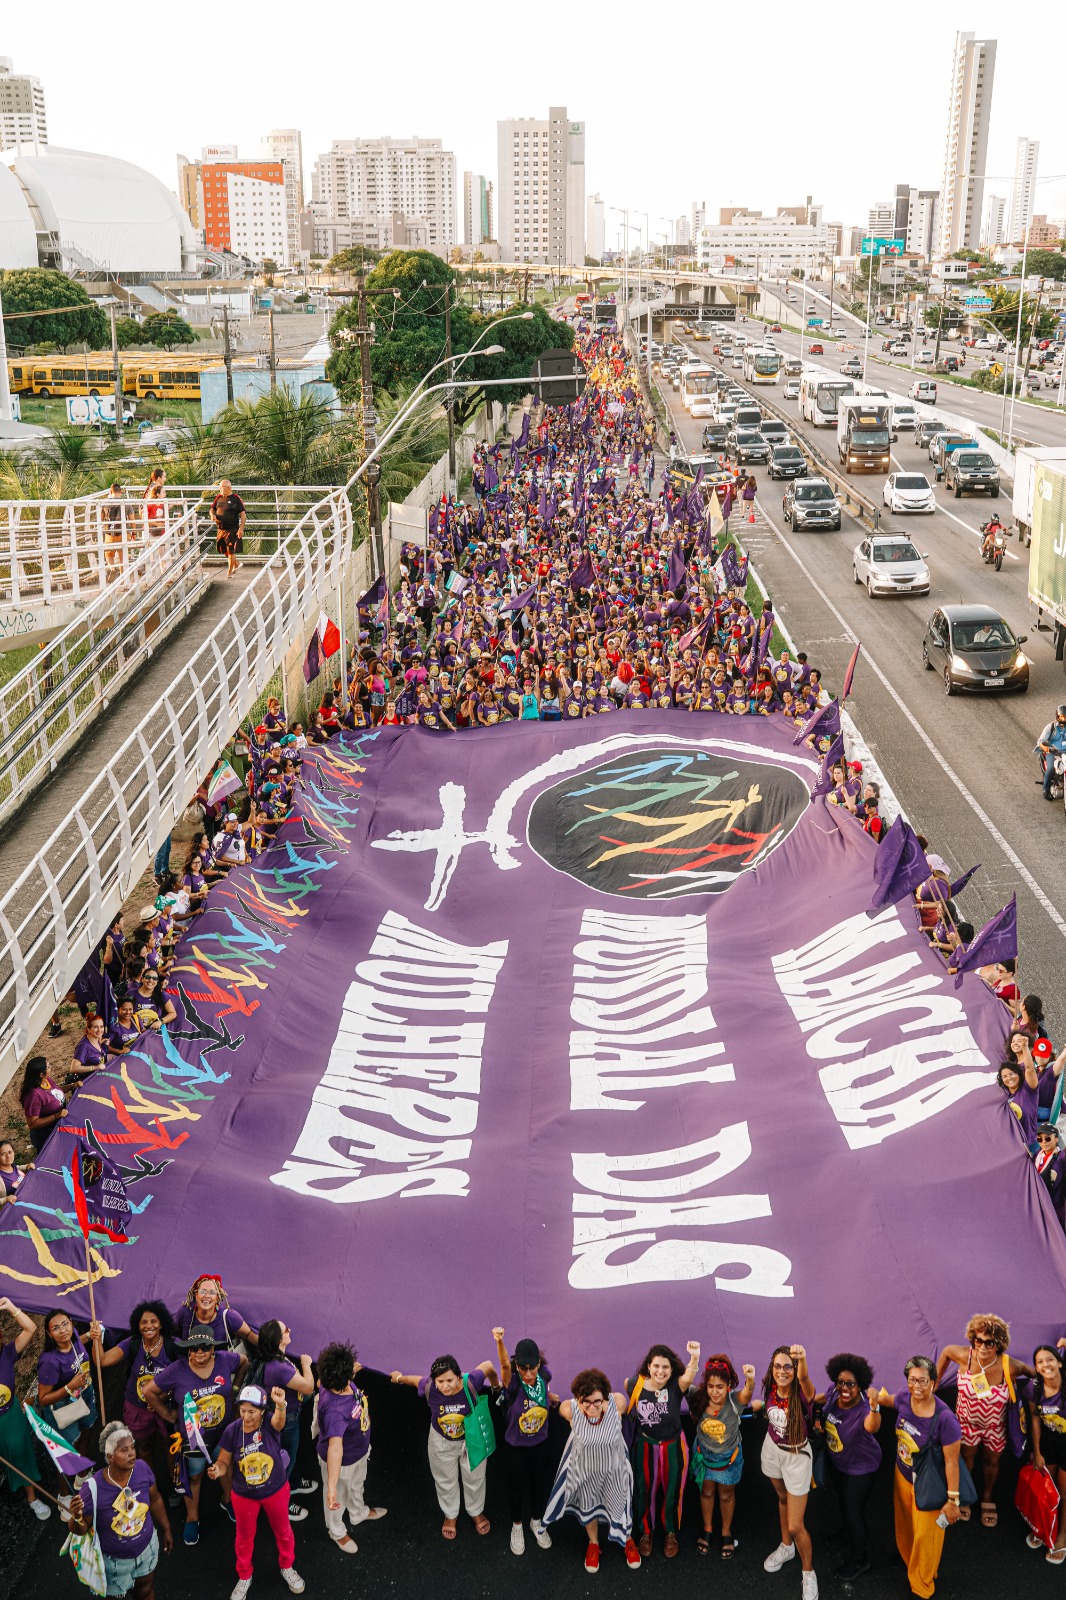  “Feminism is revolution”: the 3rd National Meeting of the World March of Women Brazil took place in Natal-RN